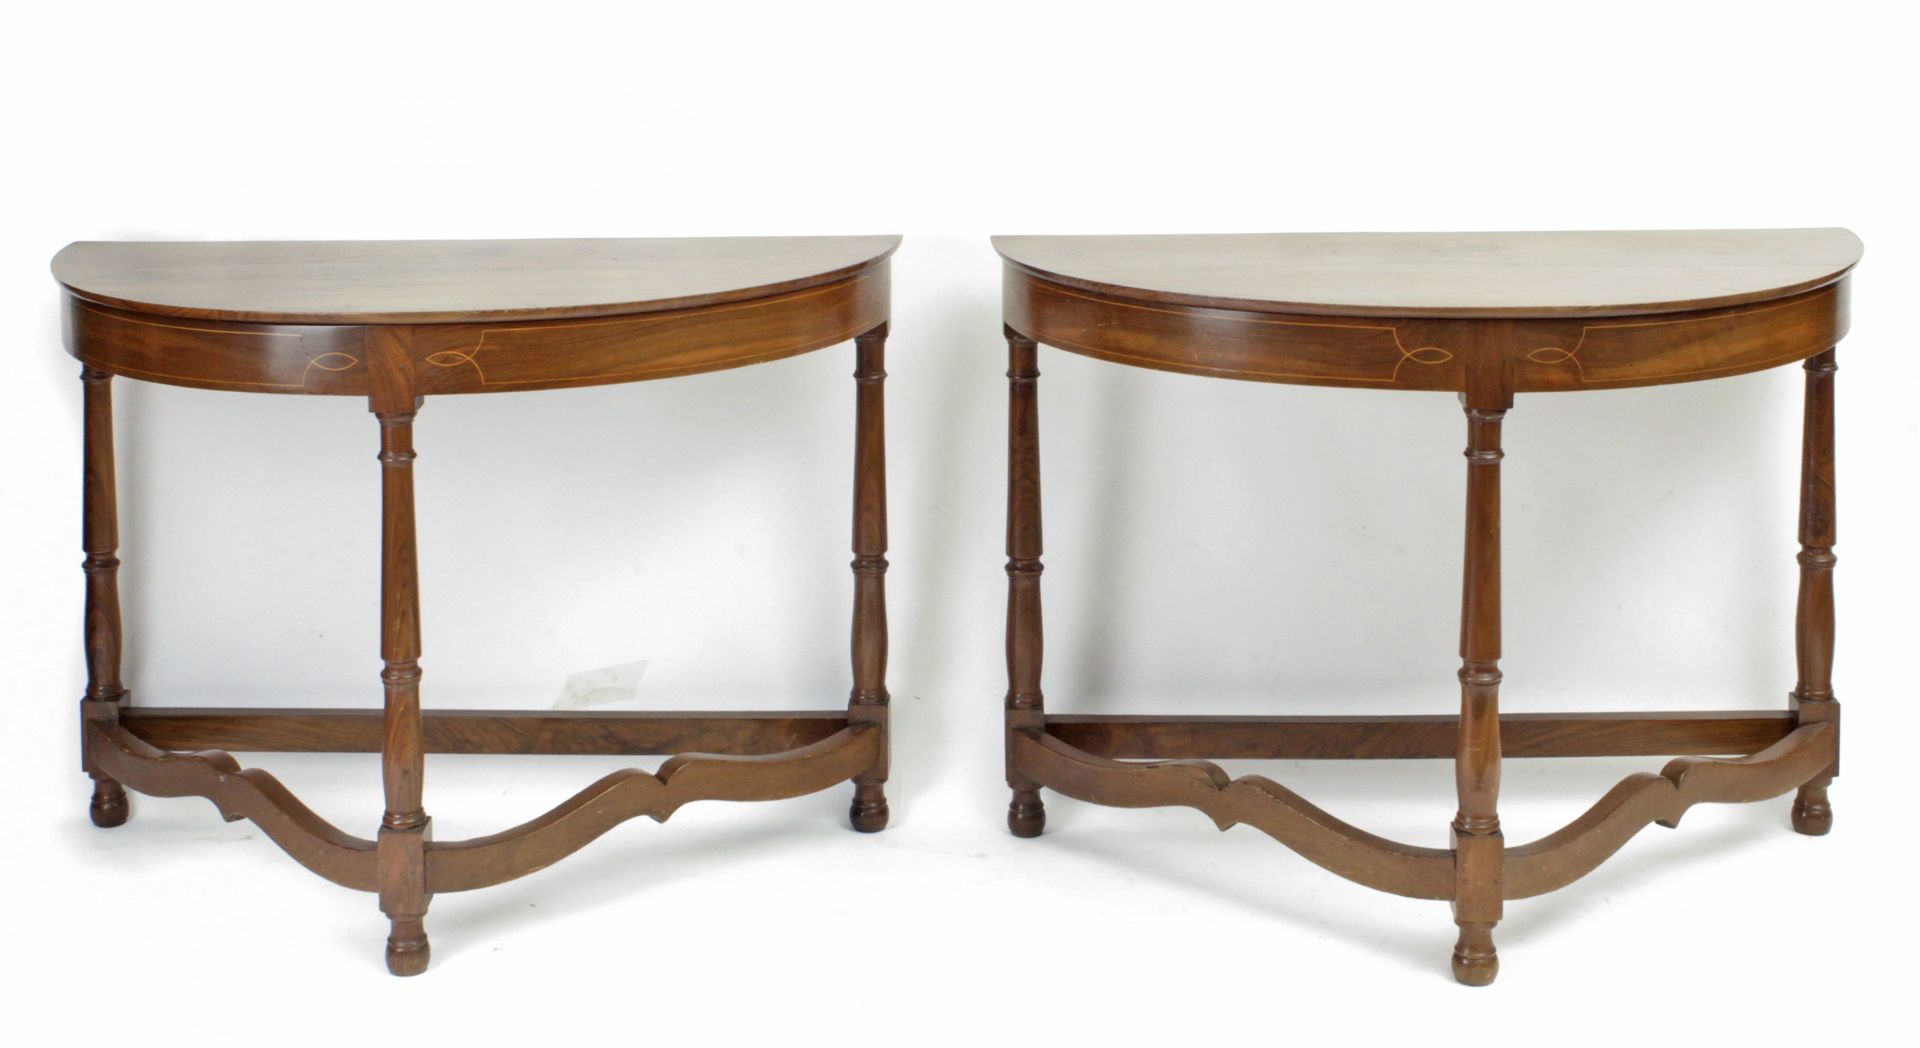 A pair of 20th century Empire style walnut console tables